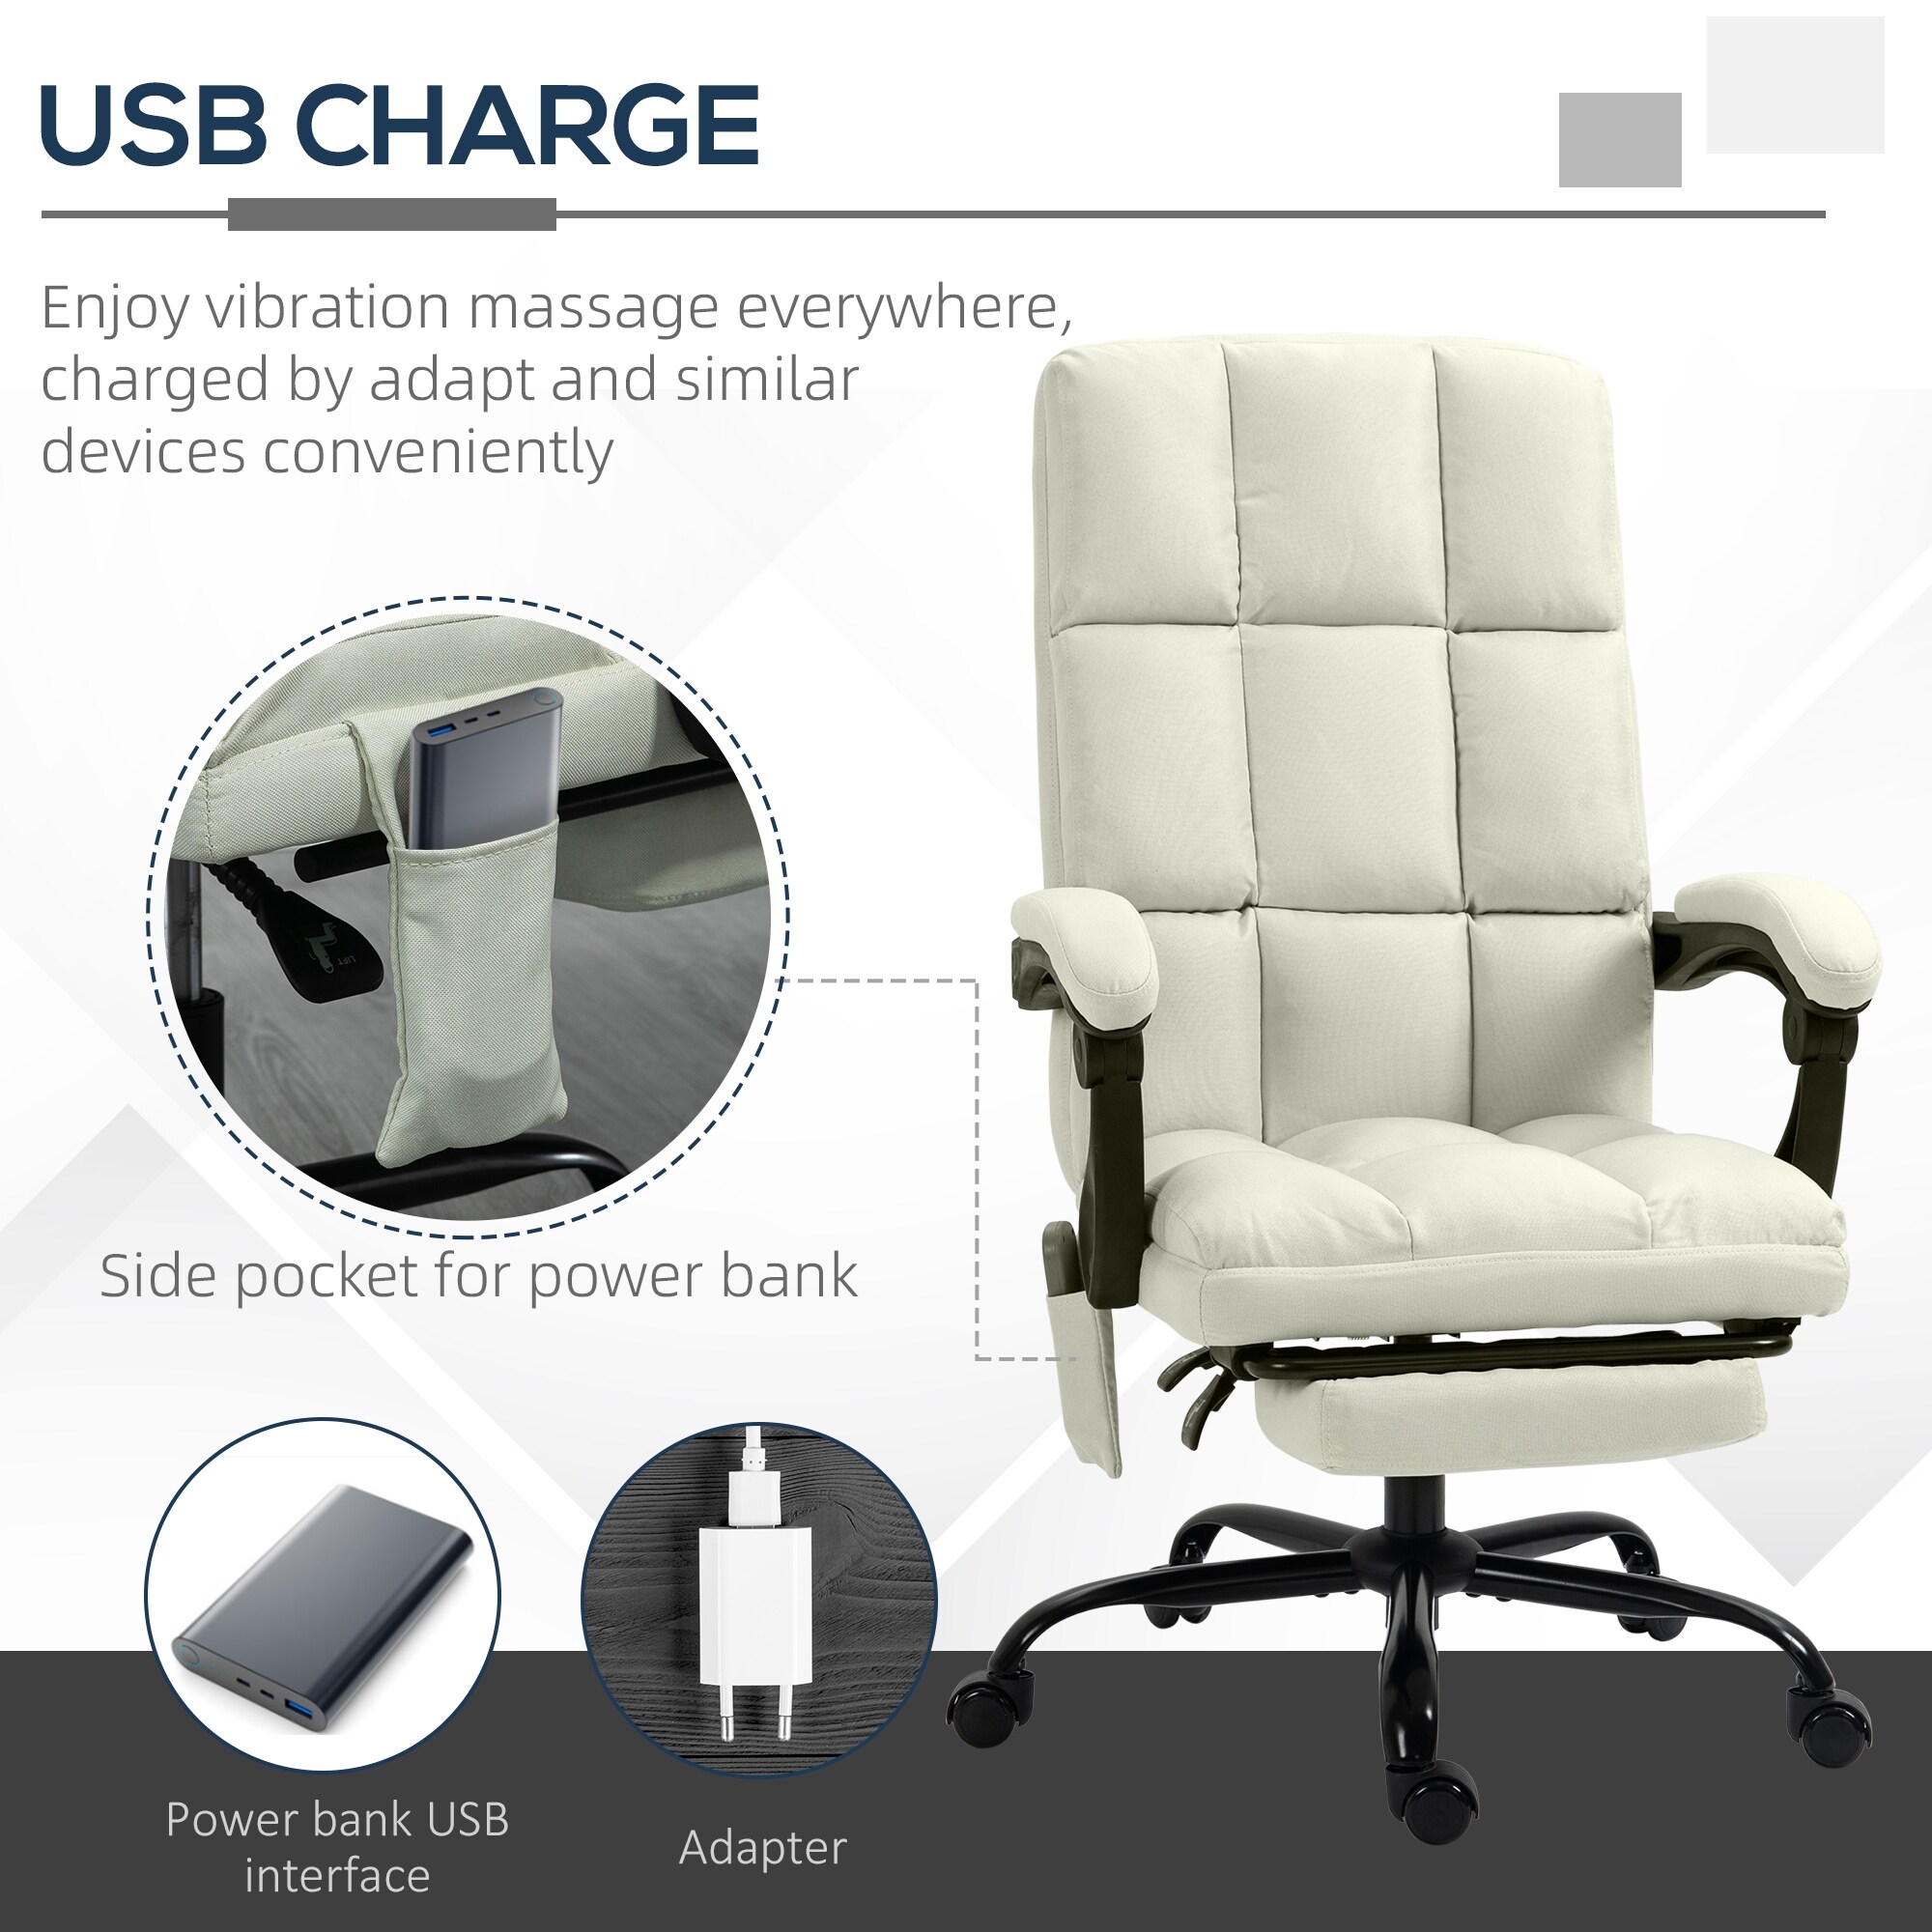 Vinsetto Office Desk Chair Recliner, Height Adjustable Movable Lumbar  Support with 6-Point Vibrating Massage - On Sale - Bed Bath & Beyond -  32696811